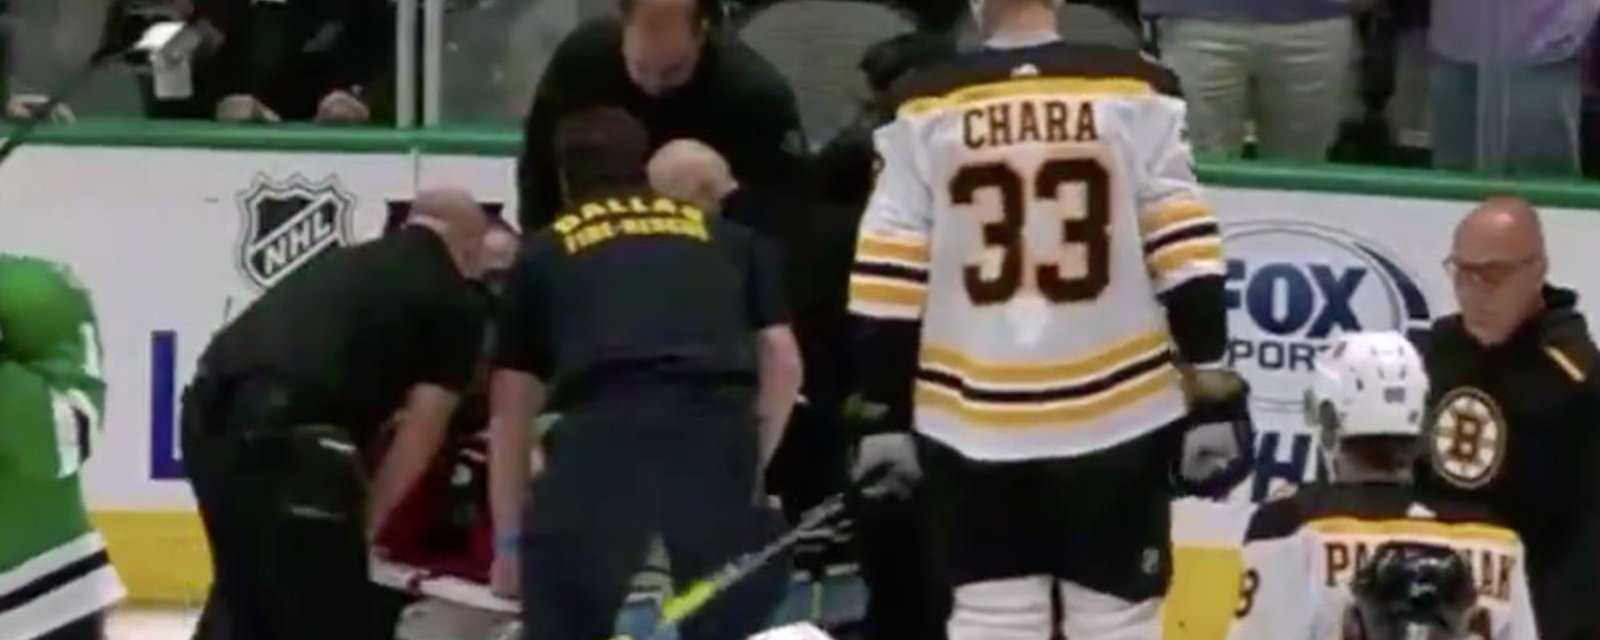 Chara makes incredibly classy move as Polak is stretchered off the ice 